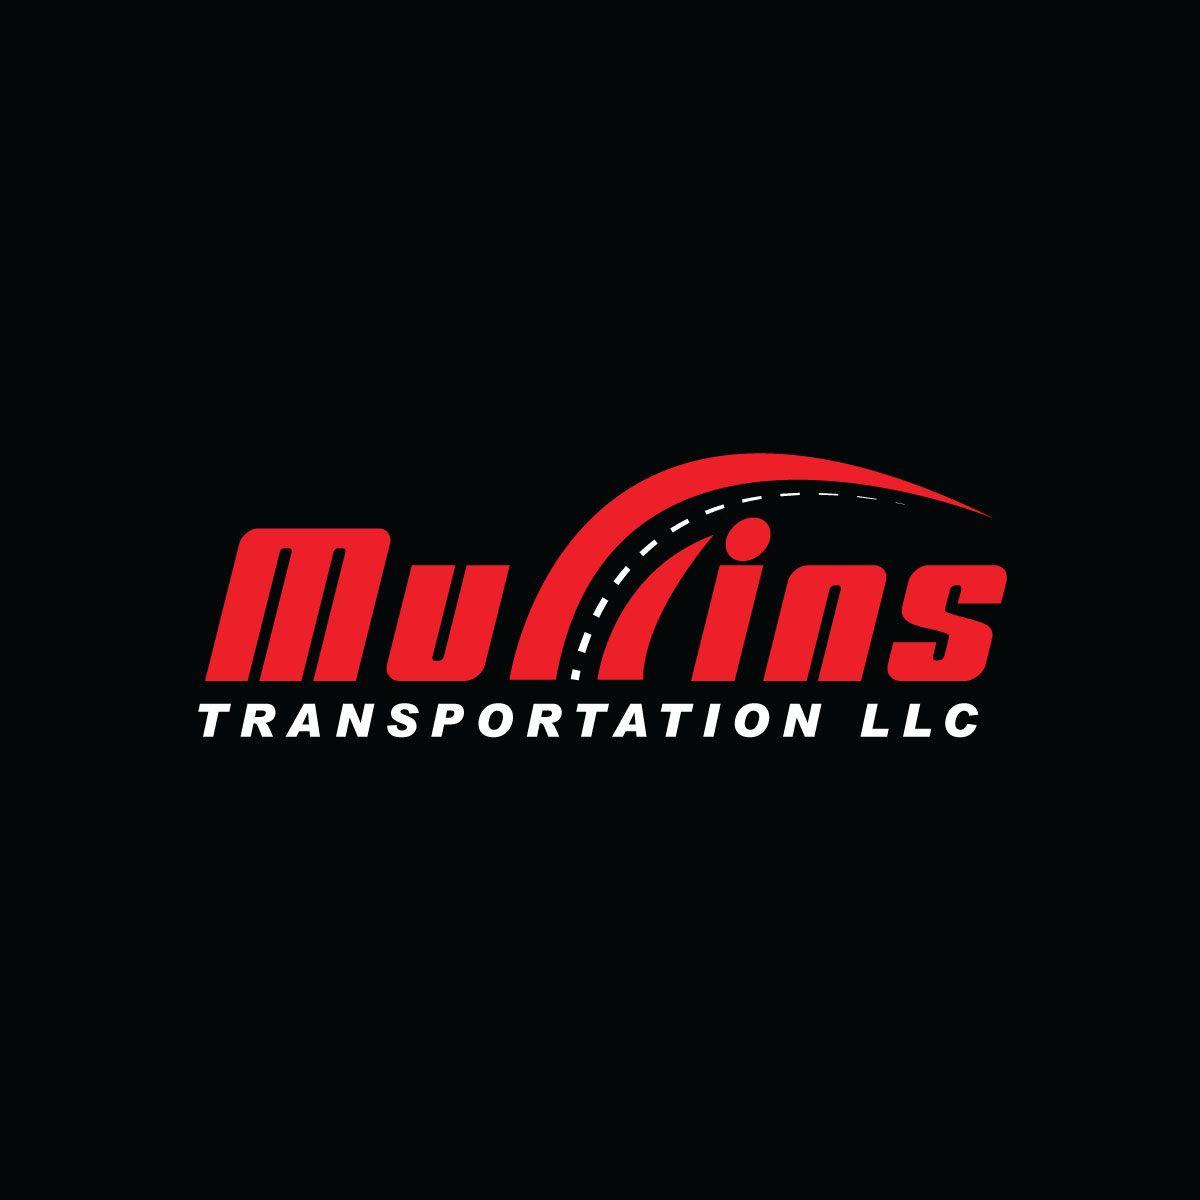 Red Trucking Company Logo - Bold, Serious, Trucking Company Logo Design for Mullins